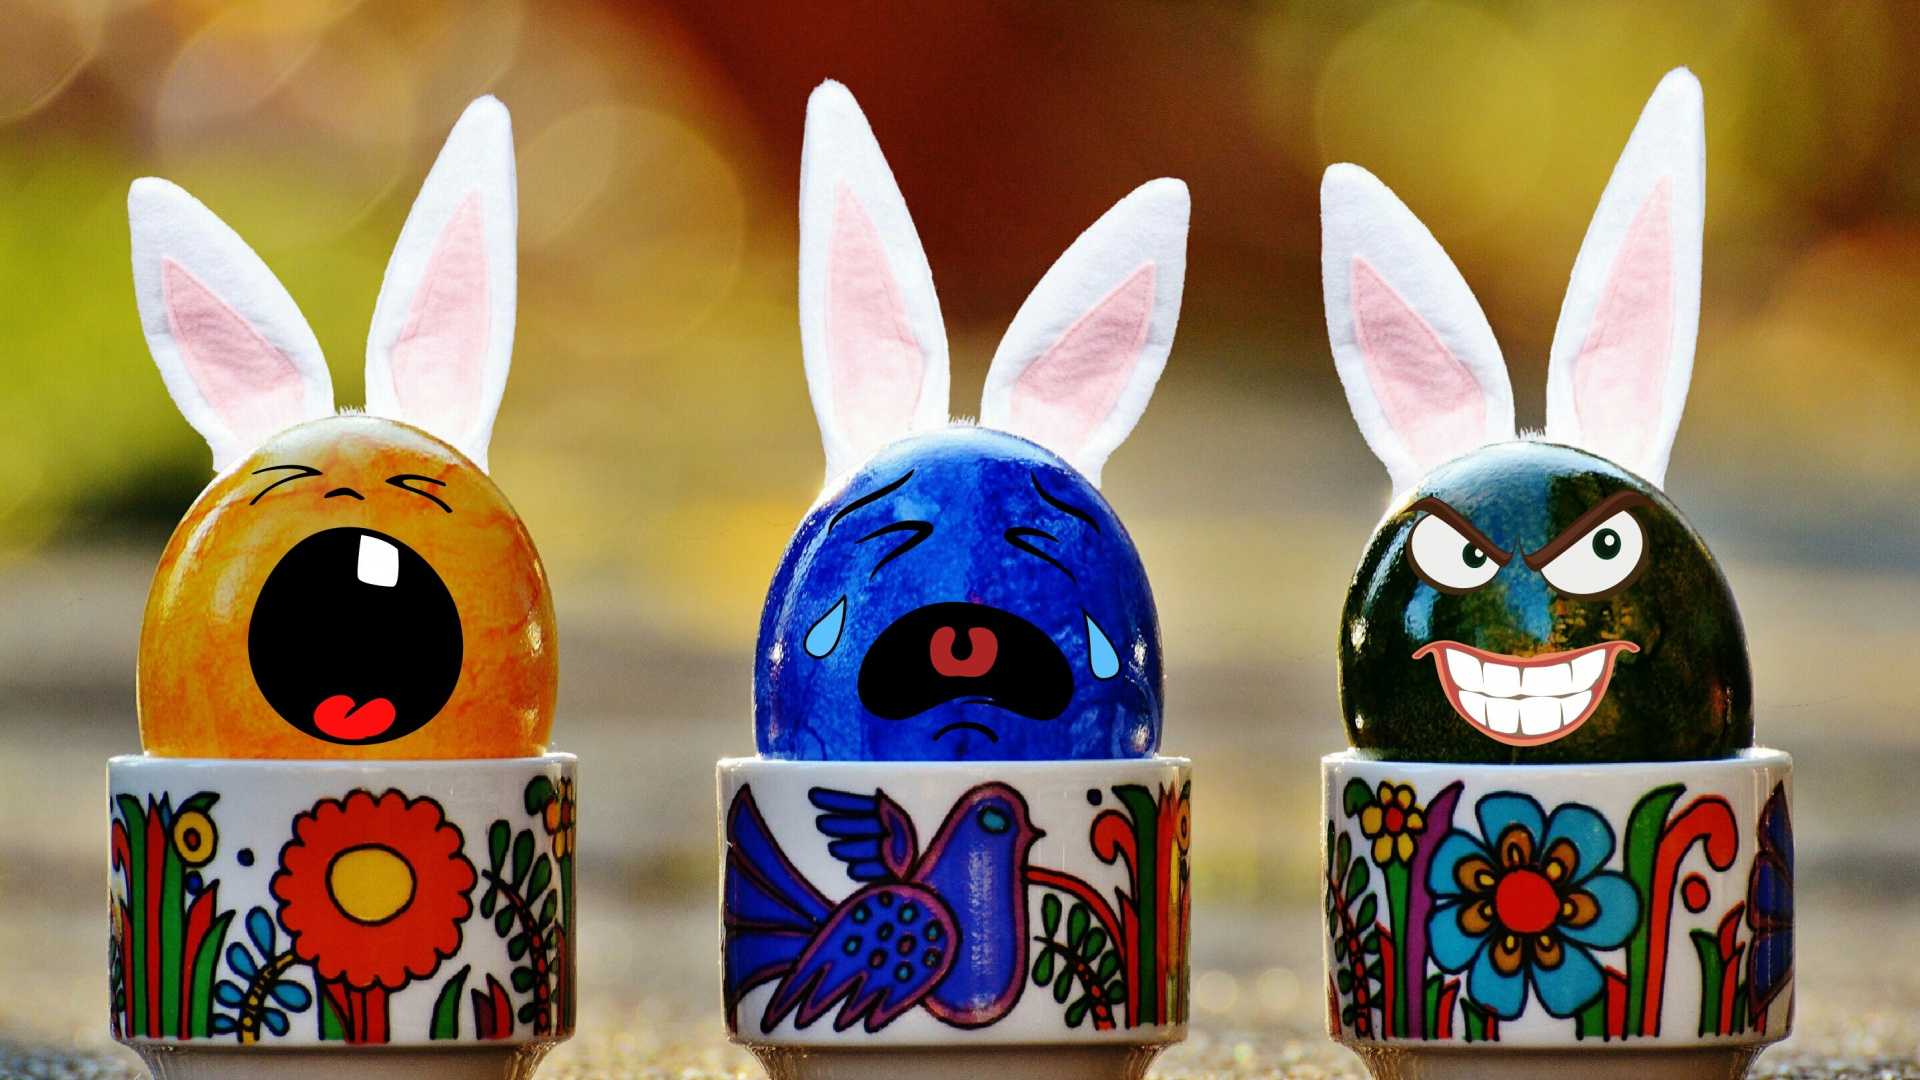 Easter Egg, Rabbit, Rabbits and Hares, Easter, Easter Bunny. Wallpaper in 1920x1080 Resolution